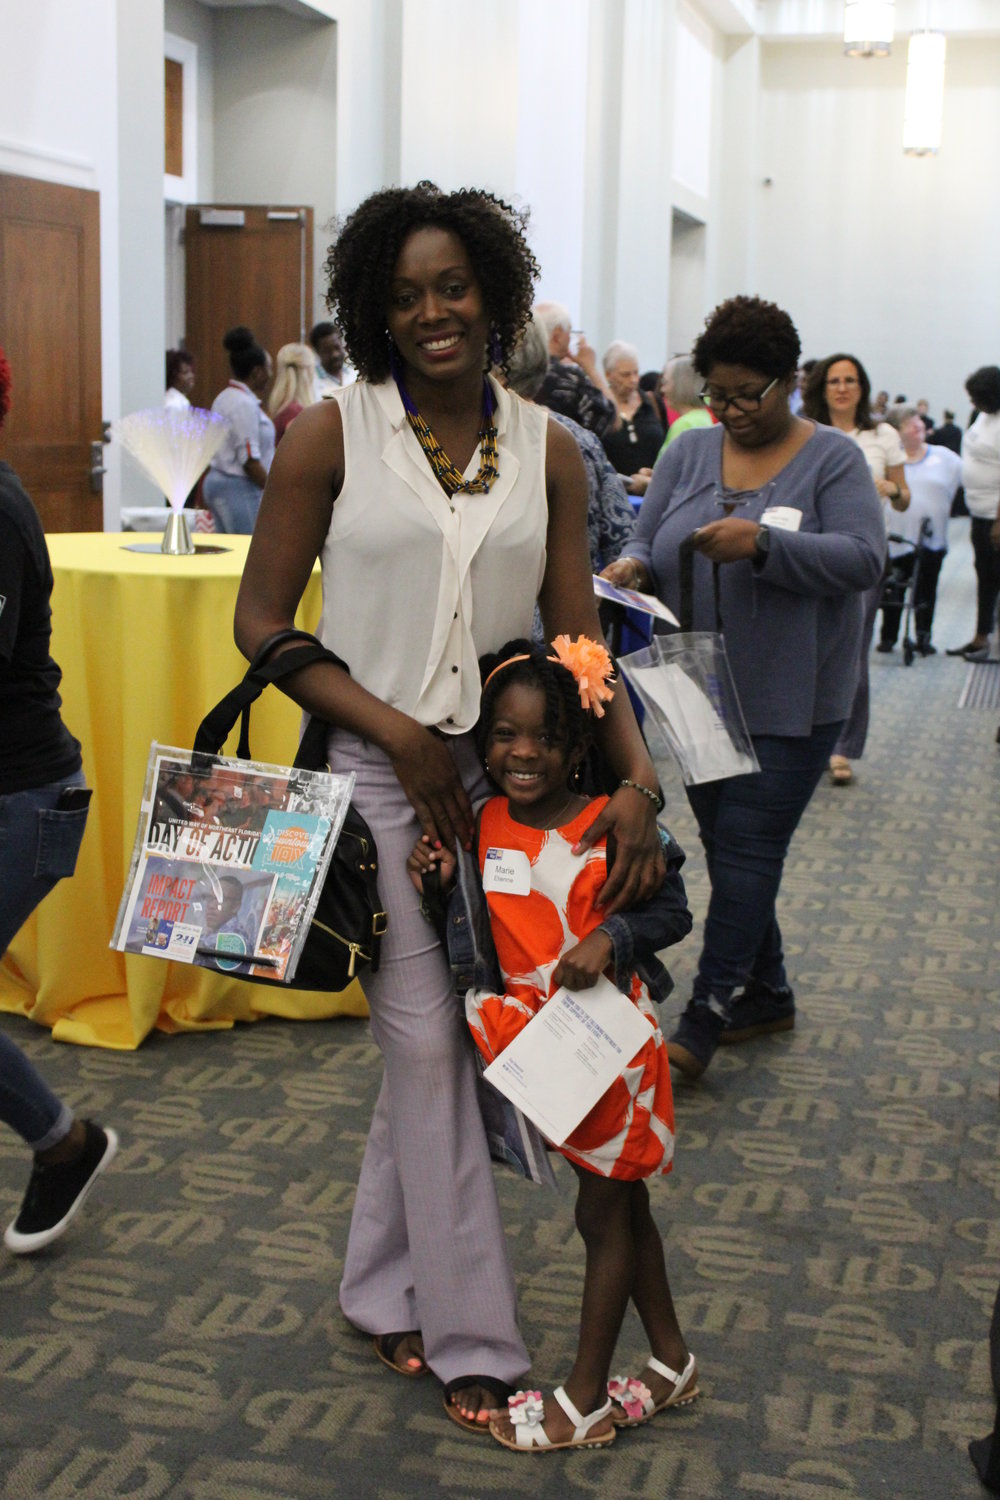 ReadingPals volunteer, Marie Etienne and daughter enjoy an evening of celebration at United Way of Northeast Florida’s annual Volunteer United event.